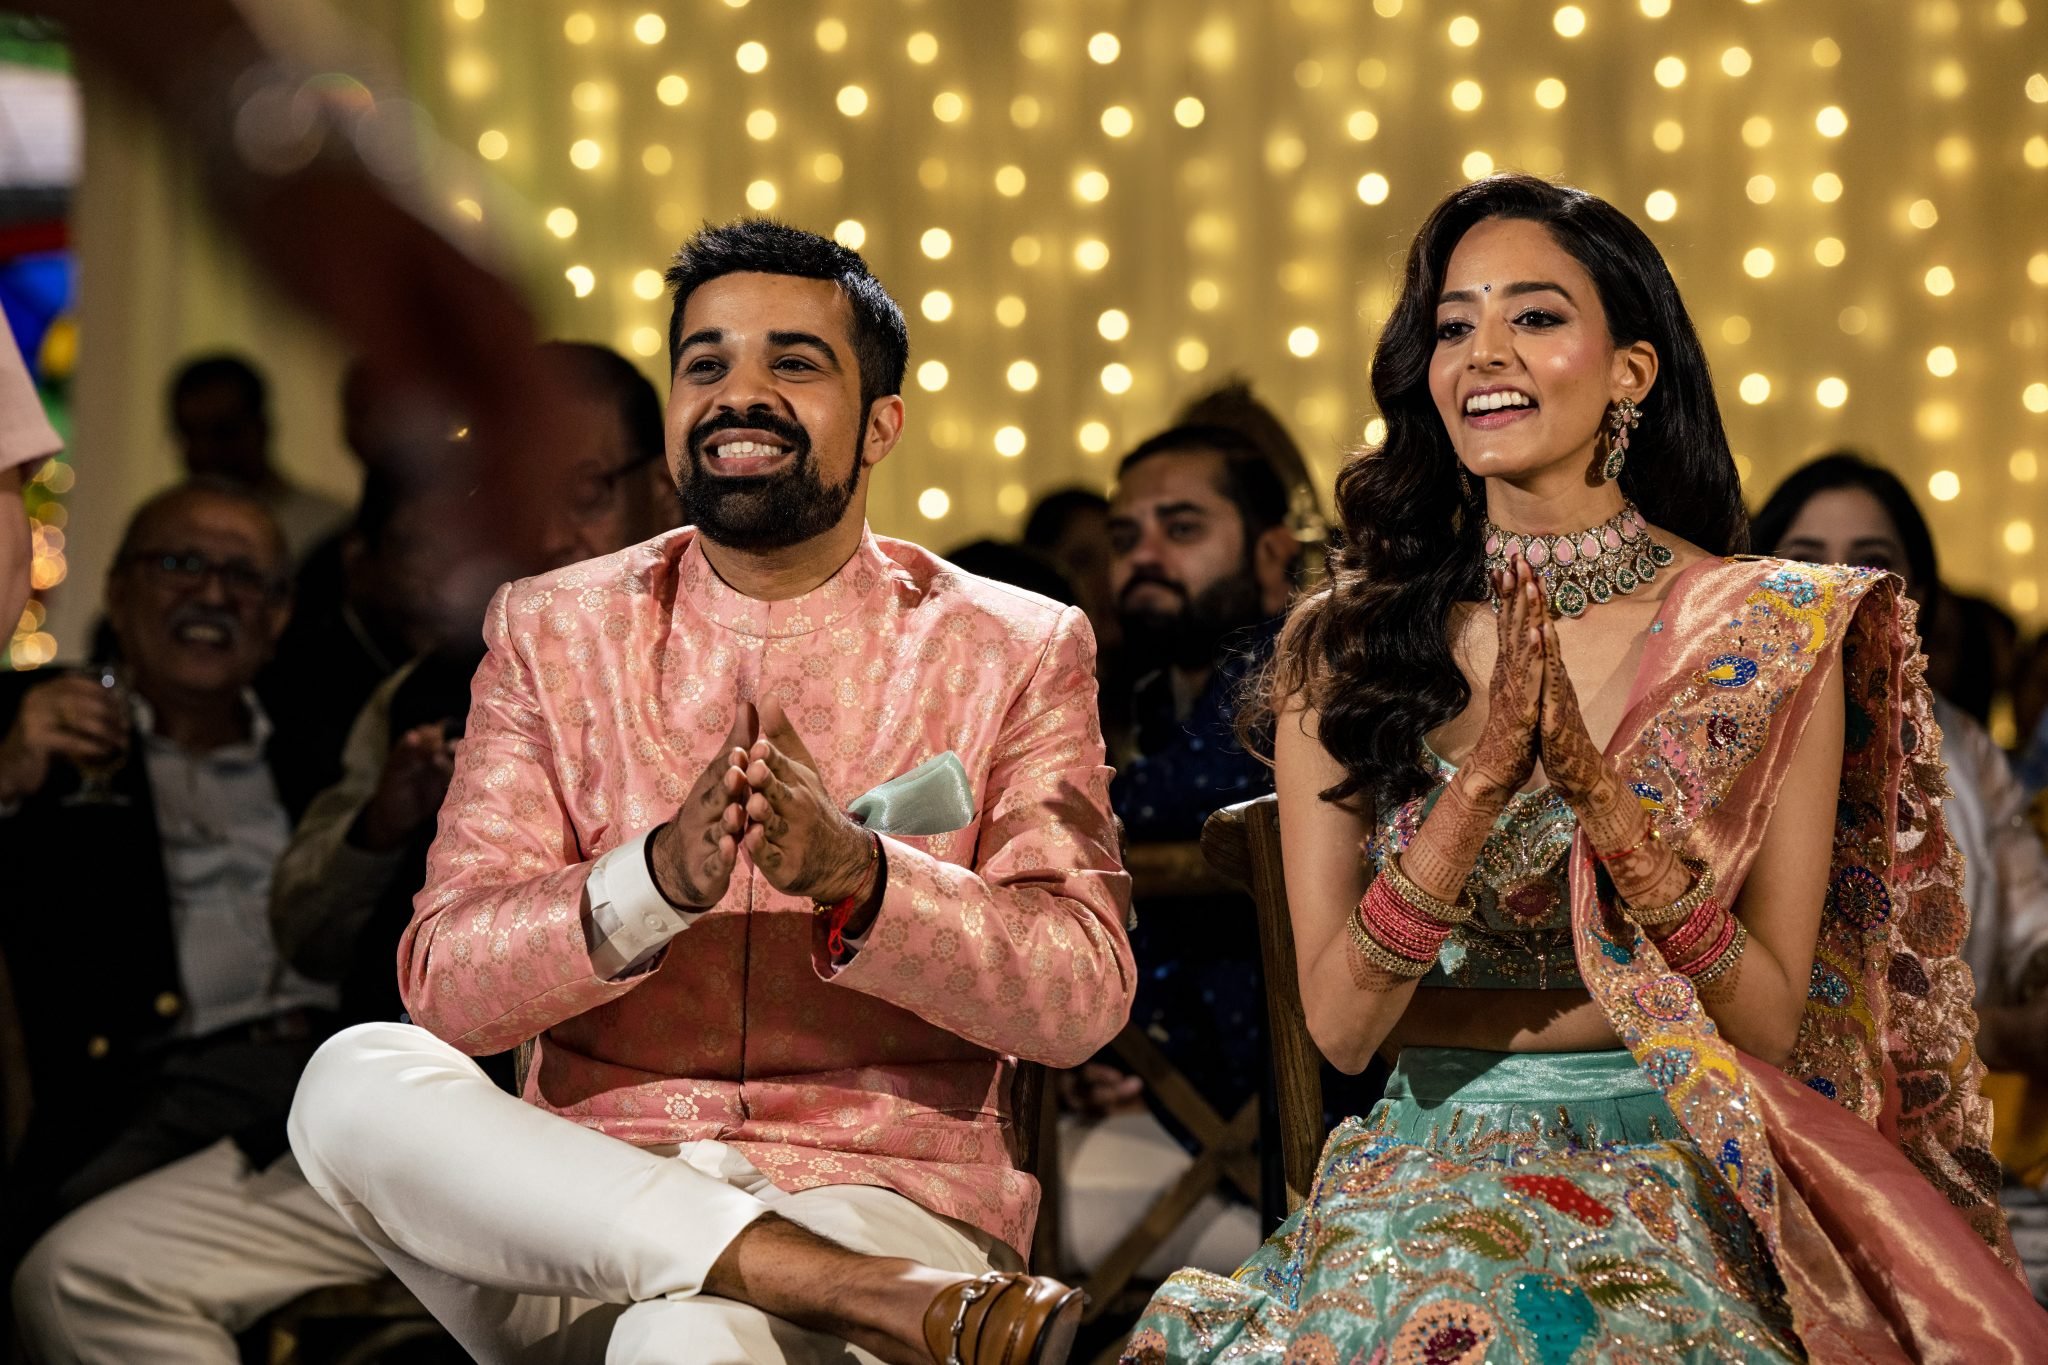 An Indian couple clapping at their Biltmore Estate wedding reception.